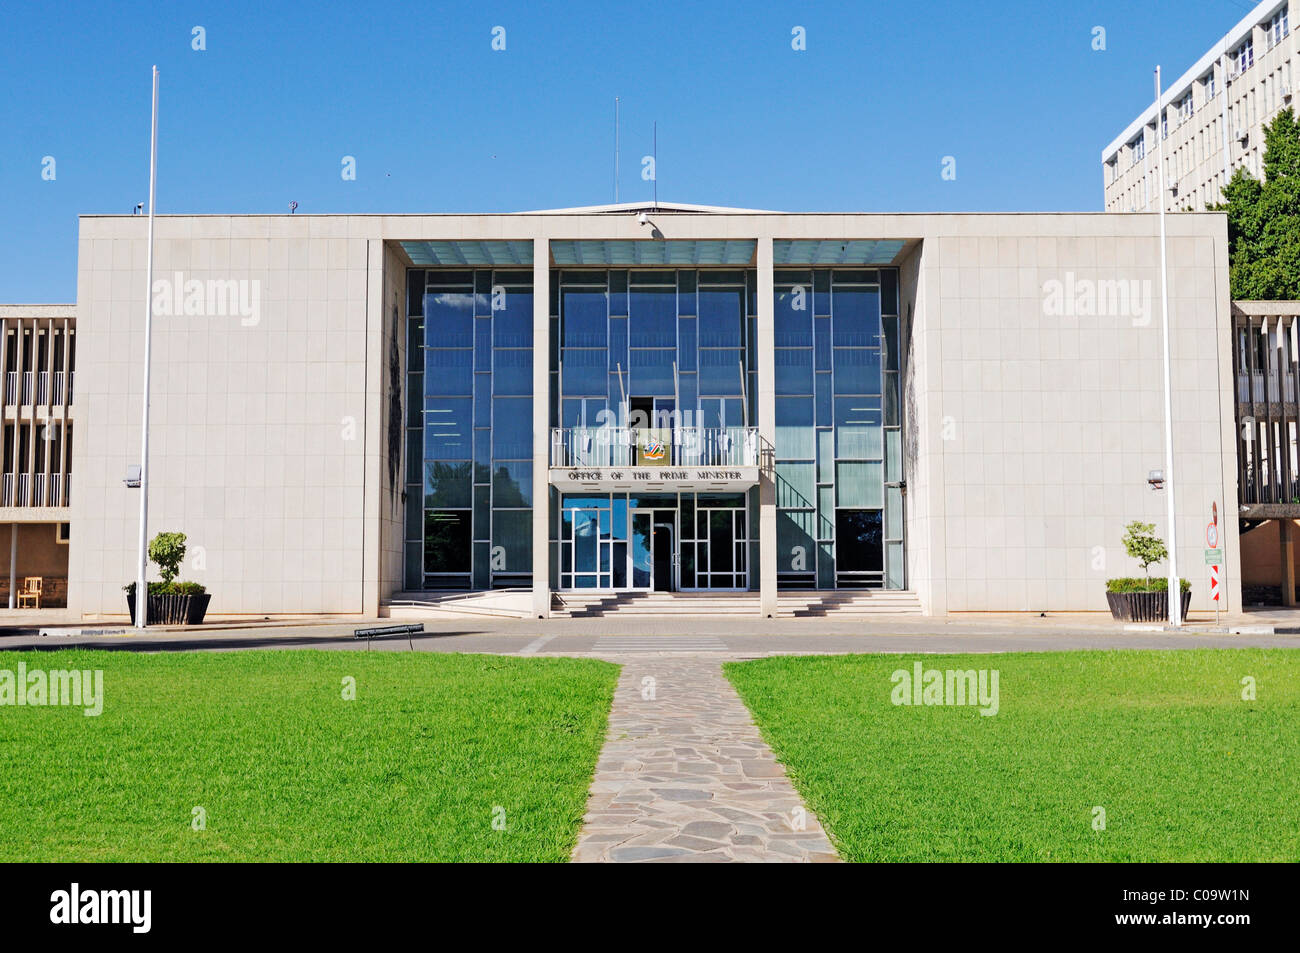 Official residence of the Prime Minister of the Namibian government, historic center of the capital Windhoek, Namibia, Africa Stock Photo